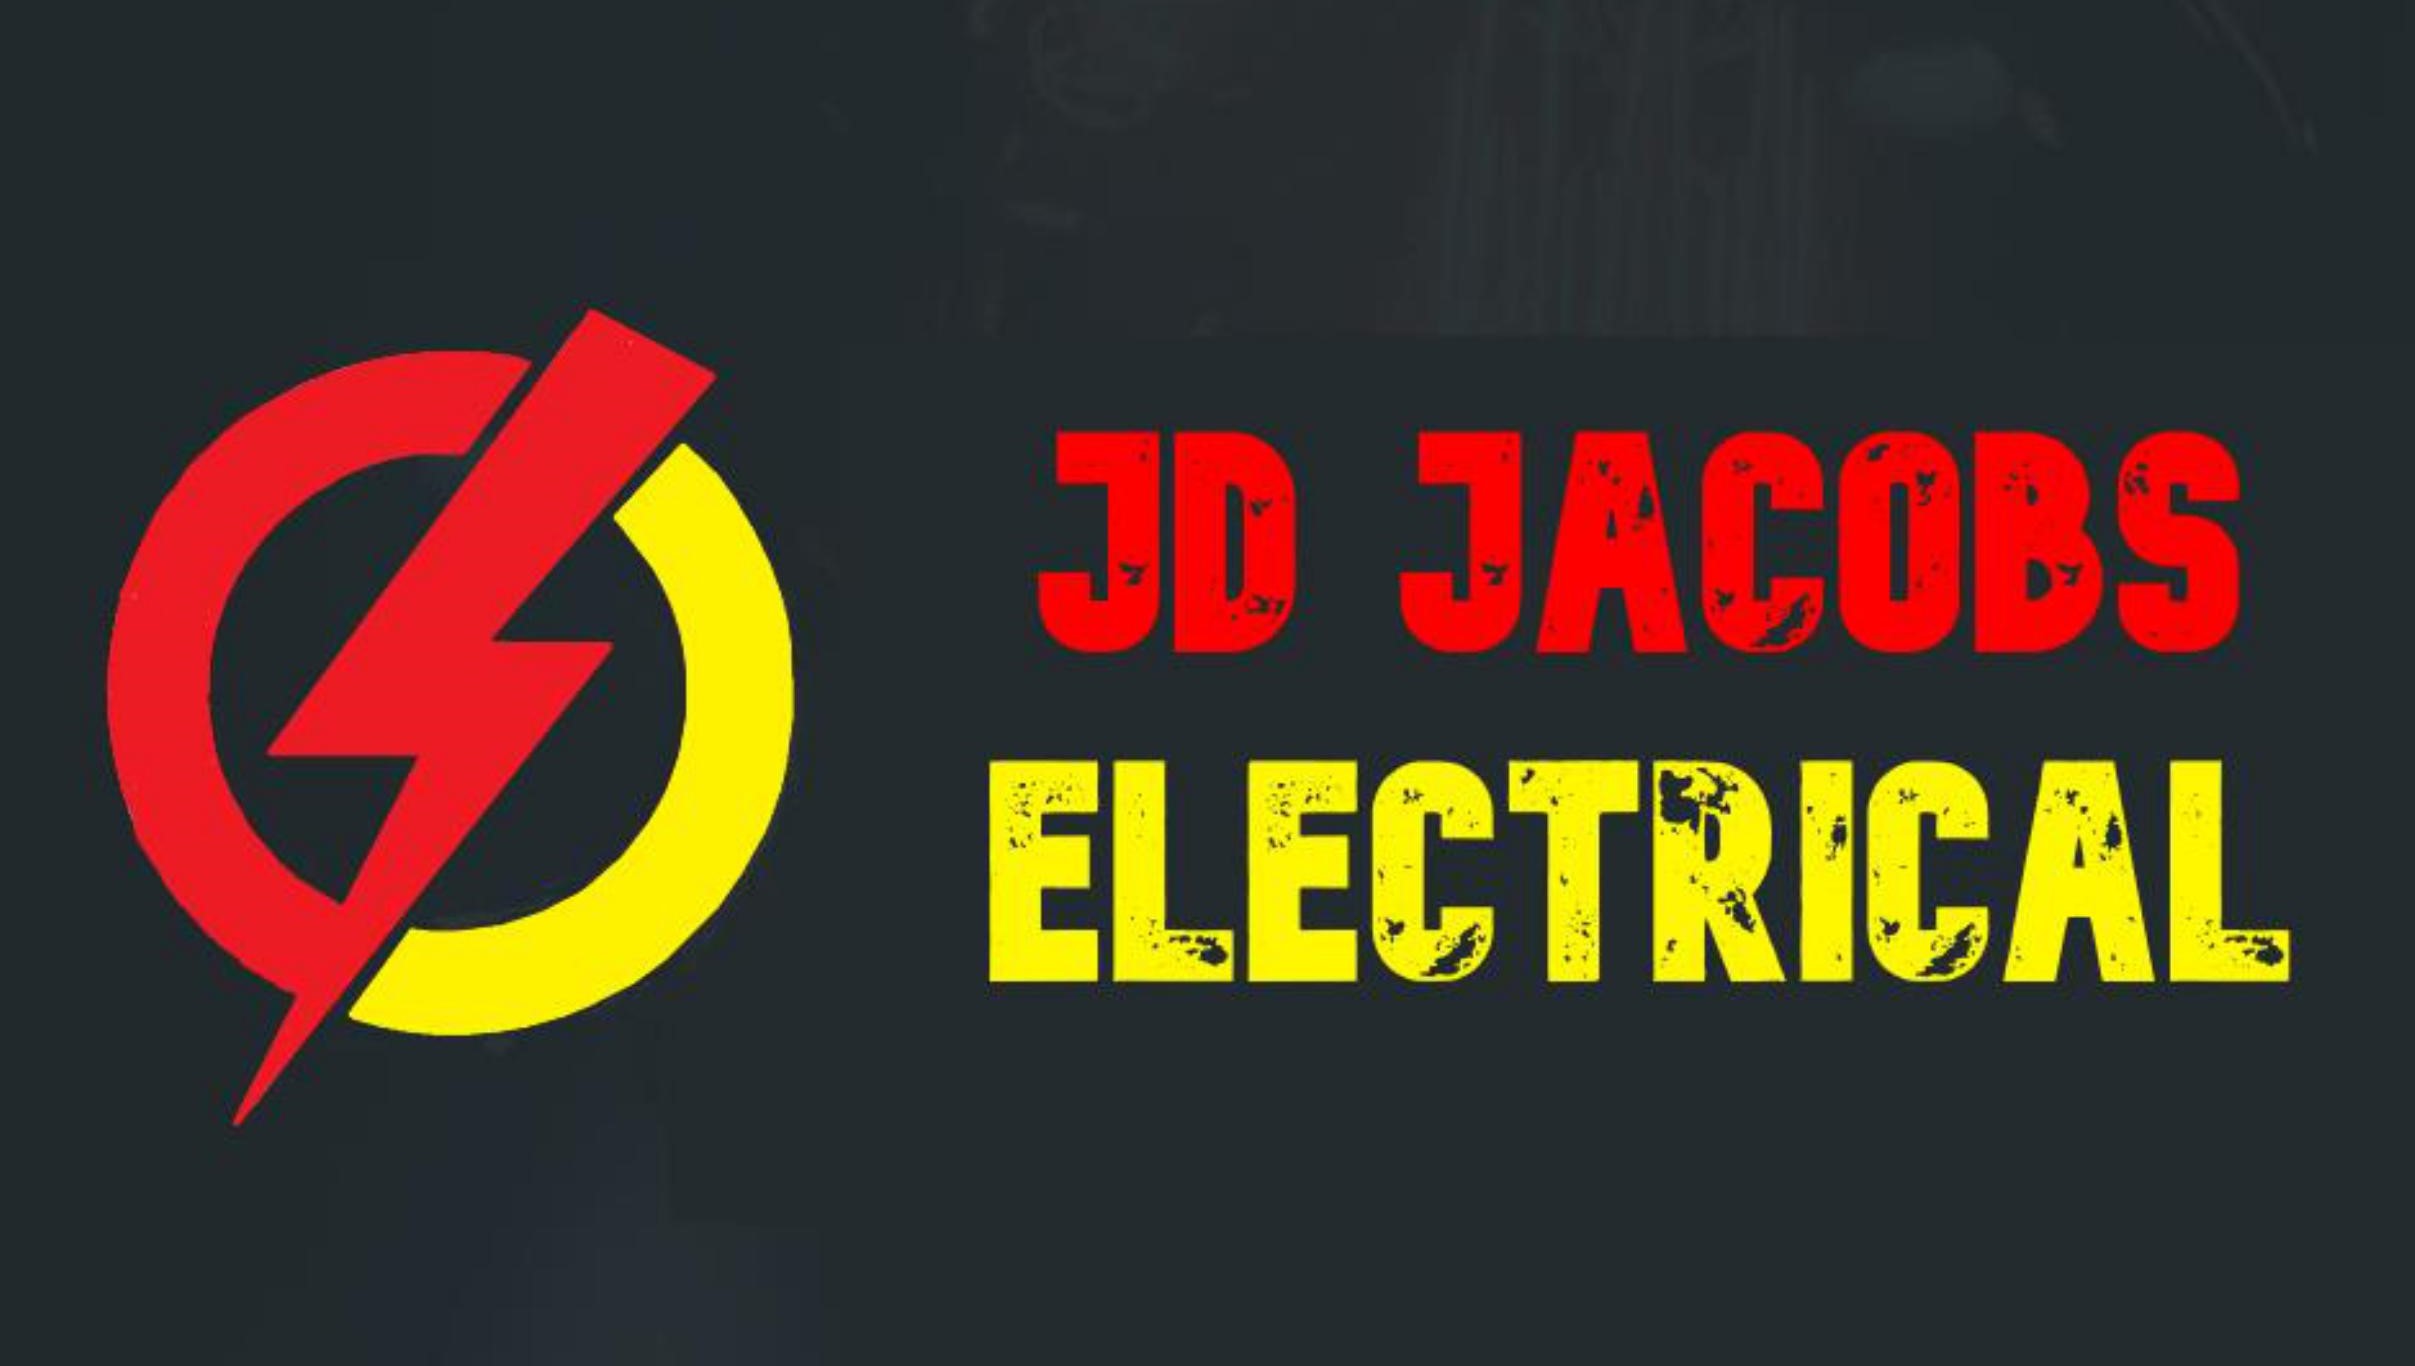 house of carers - jc jacobs electrical